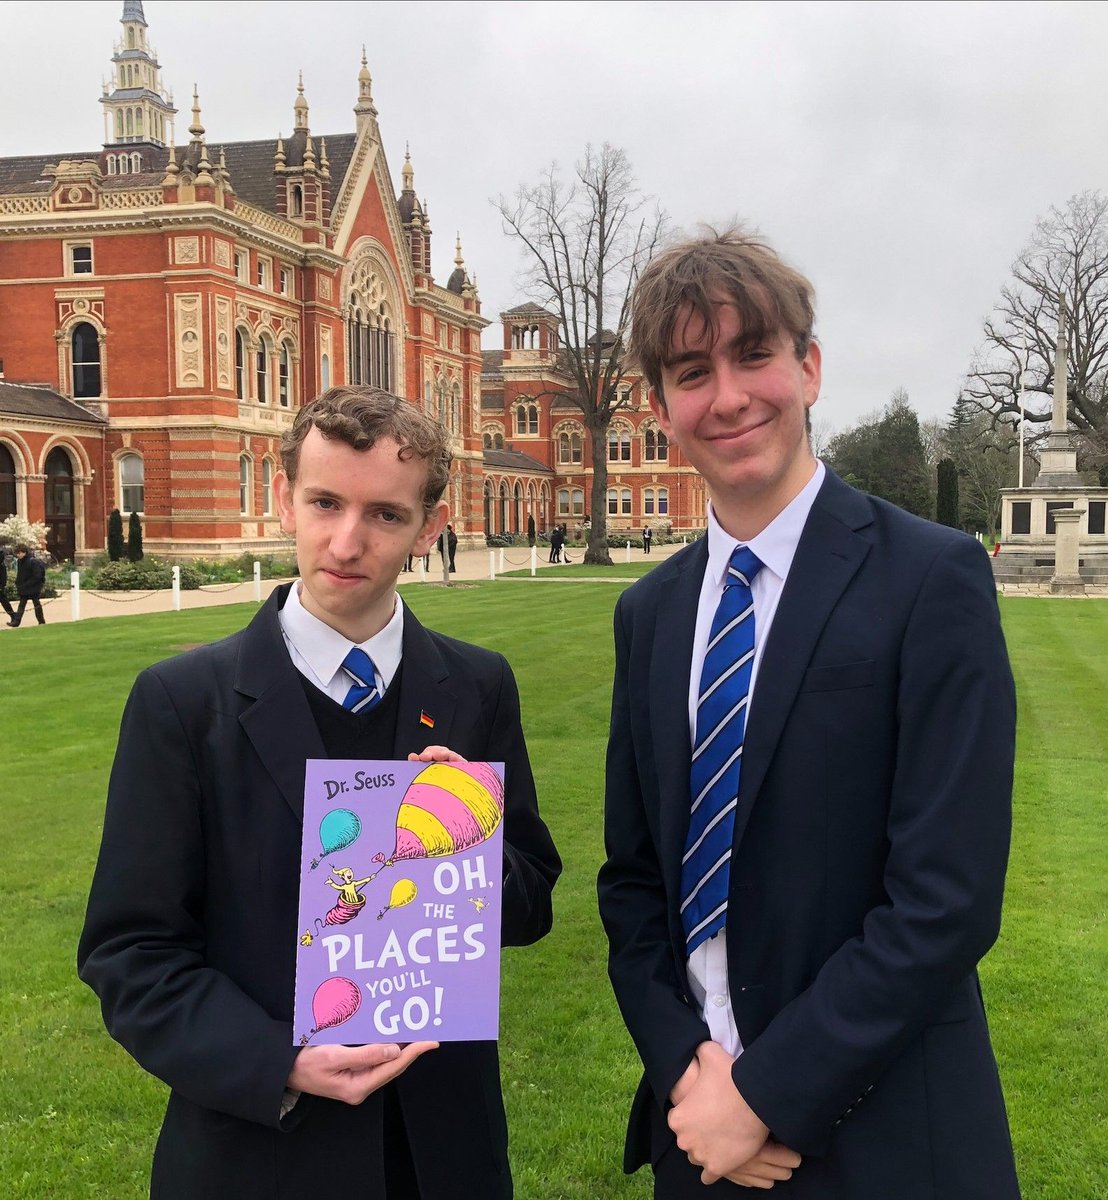 Well done to all who took part in the Upper School House Poetry Recital. Your superb recall, verve and nuance held audiences spellbound! Congratulations to winners Nicholas and William, both Marlowites.